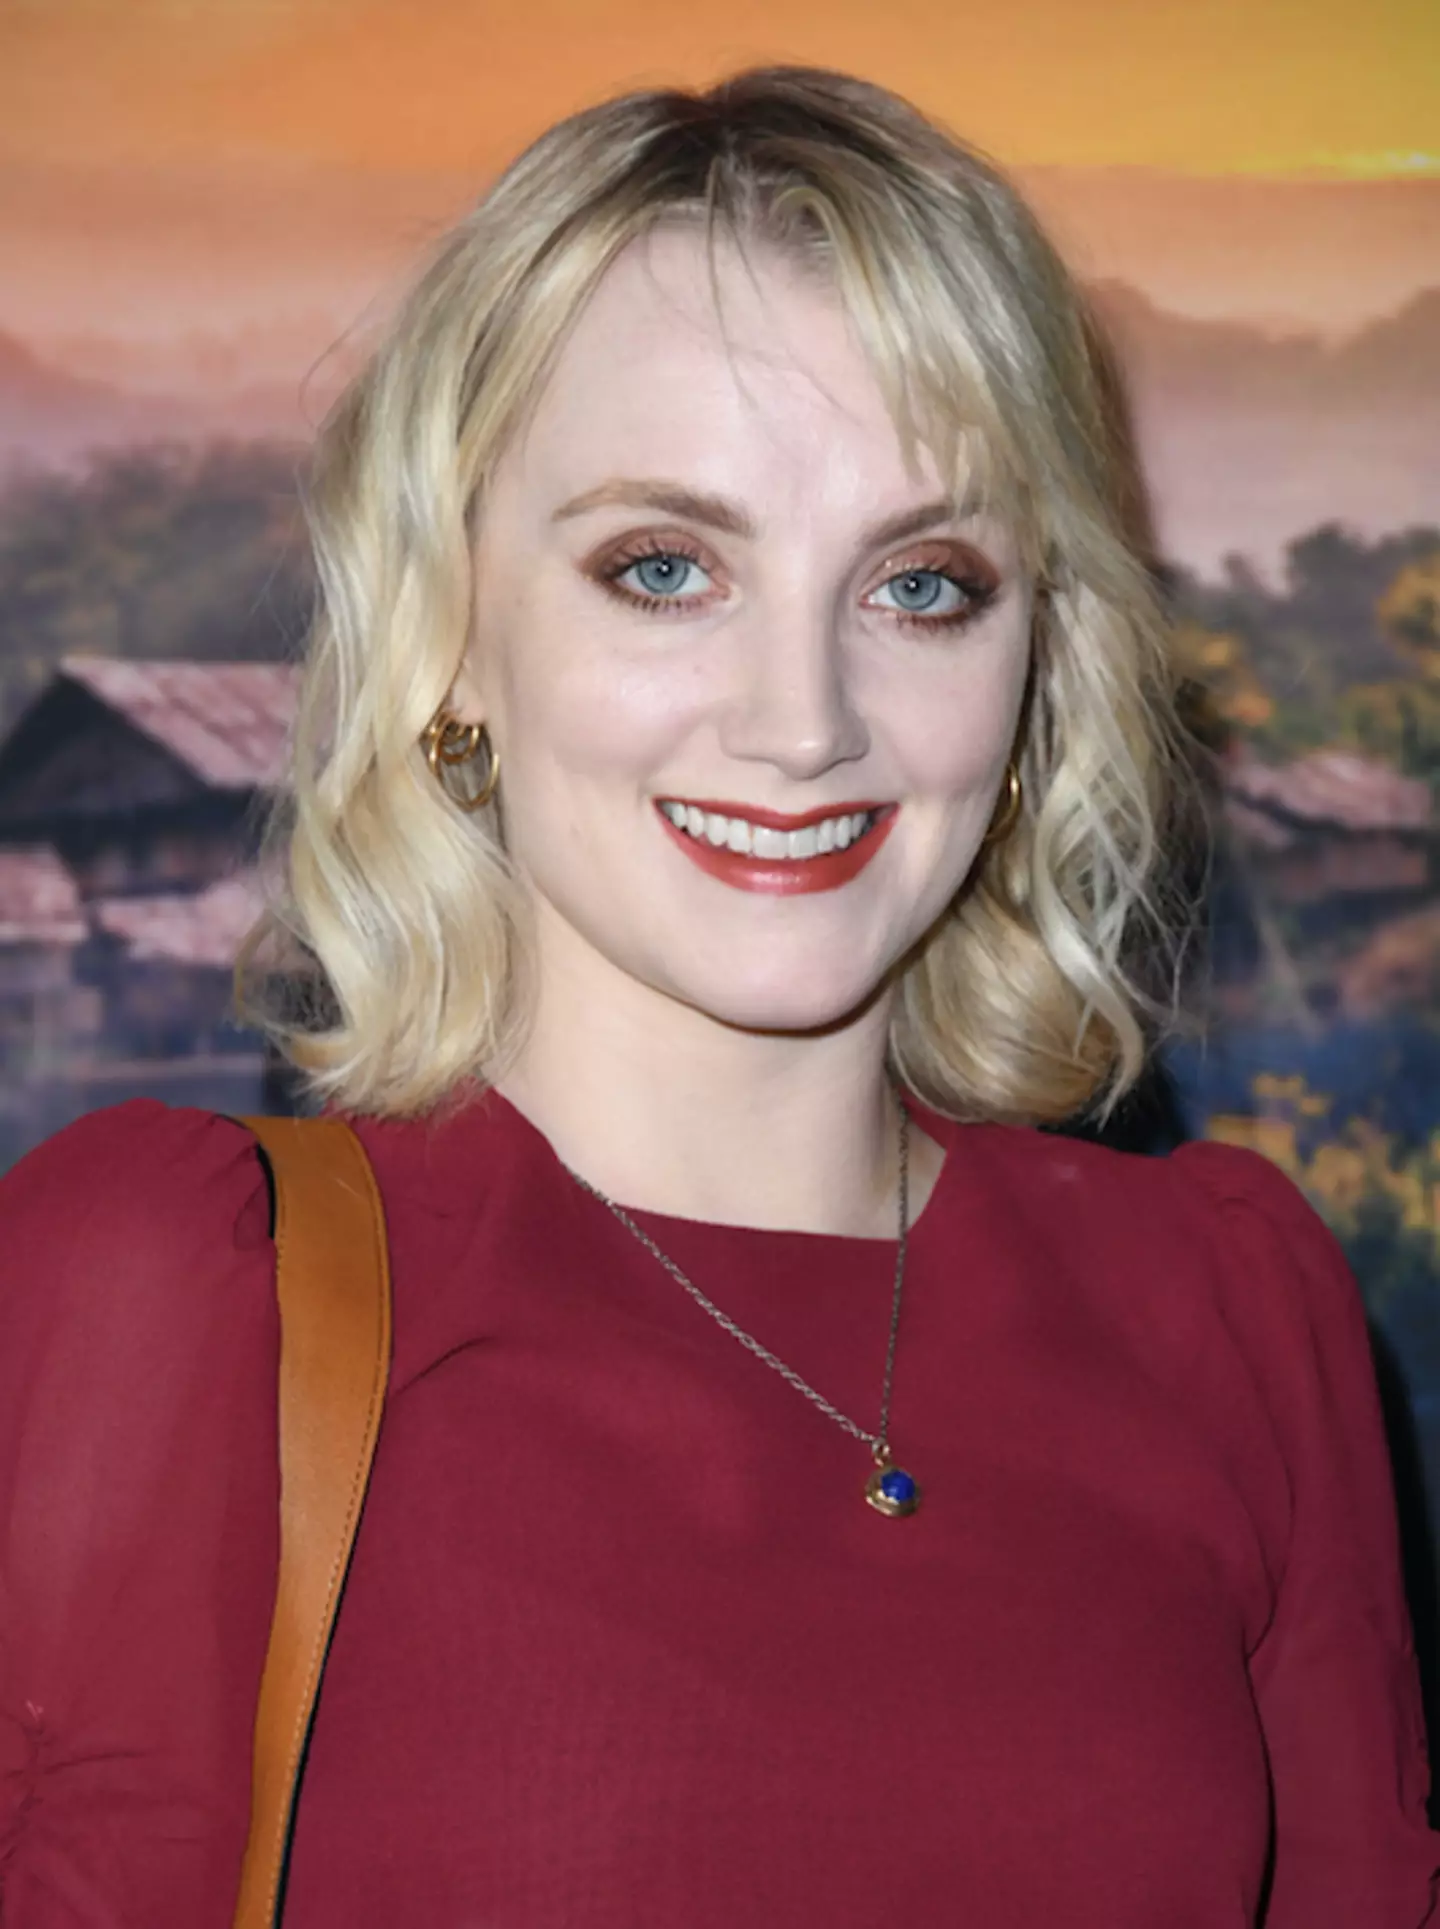 Evanna is 30 years old now (